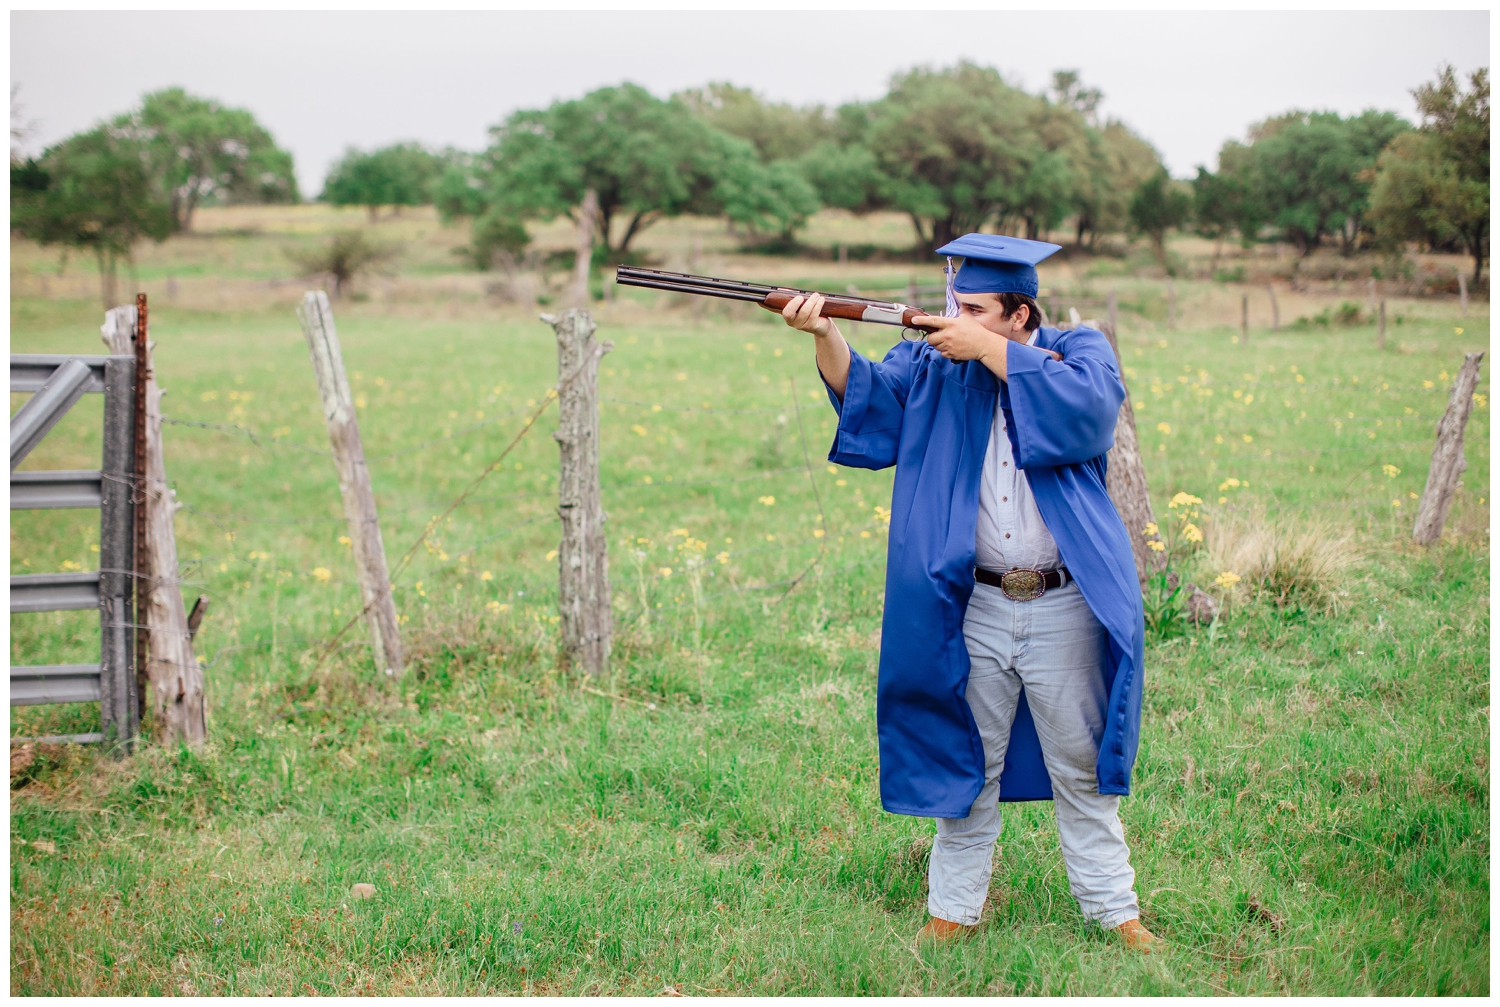 Houston high school senior guy wearing cap and gown standing in a field with a rifle